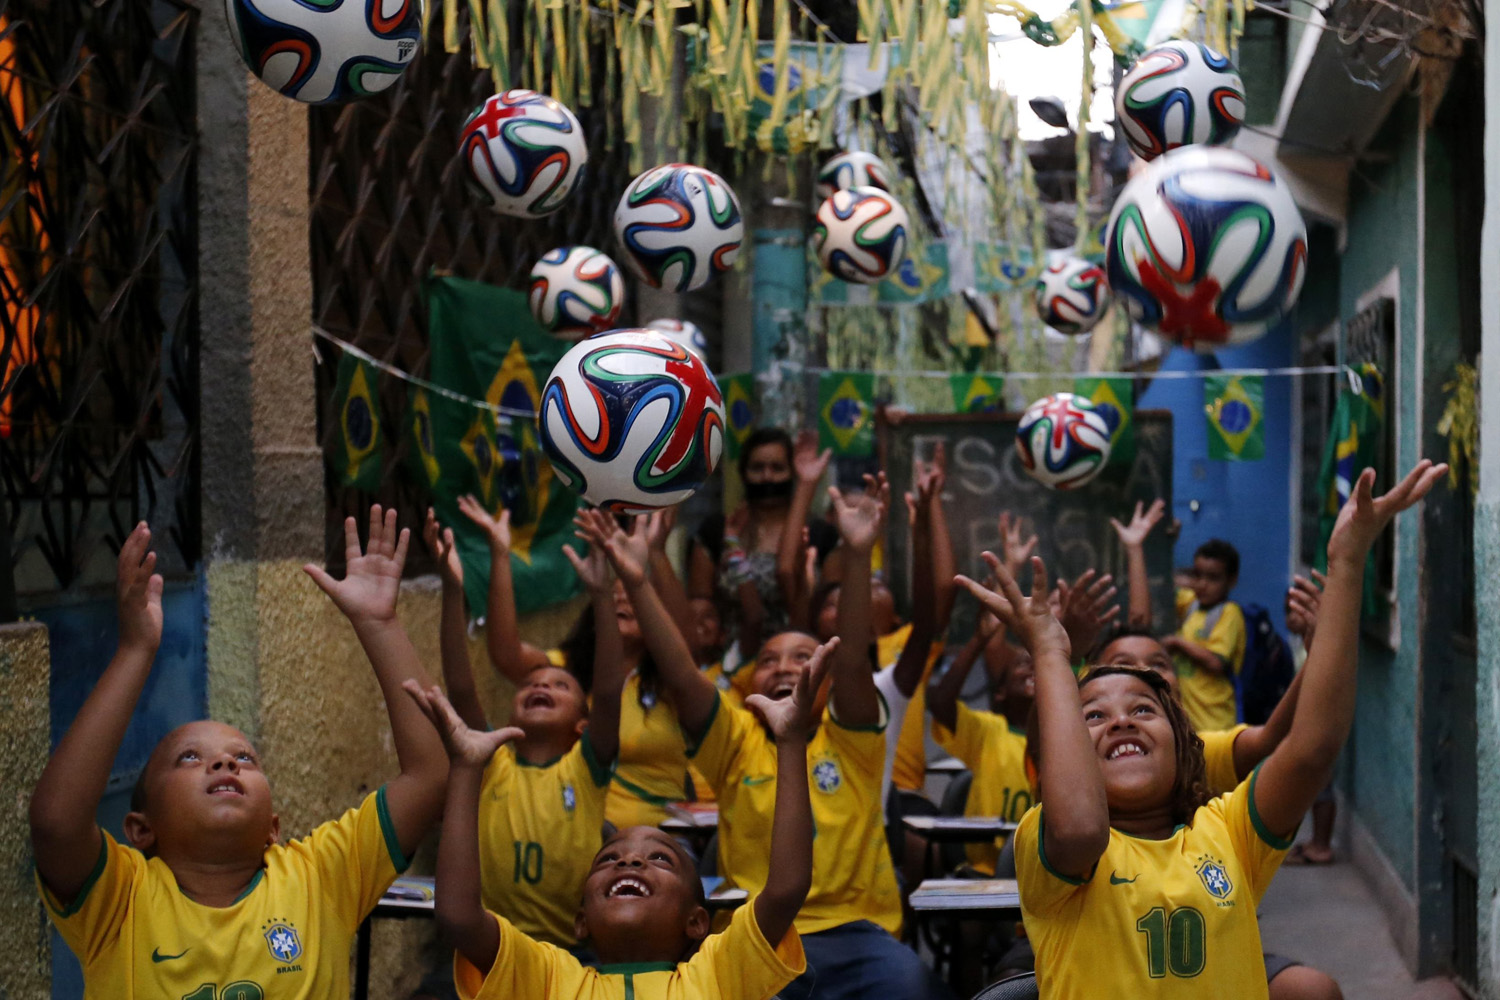 Children throw official 2014 FIFA World Cup soccer balls into the air during a protest against the 2014 World Cup, organized by the NGO Rio de Paz at the Jacarezinho slum in Rio de Janeiro on May 14, 2014.